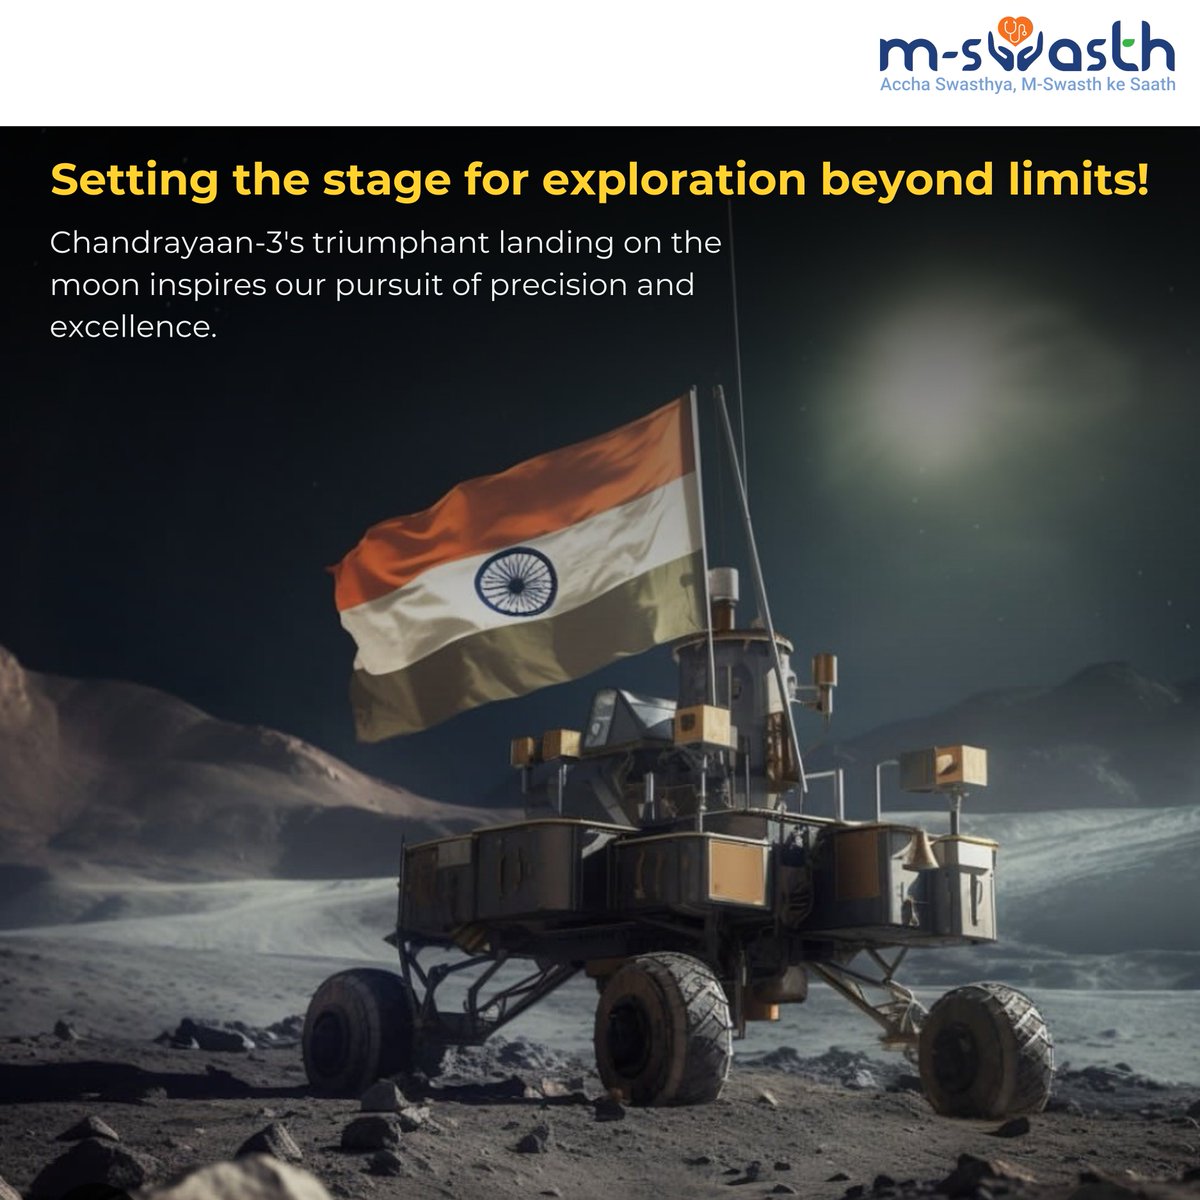 'Breaking Barriers: A Journey Beyond Limits, Congratulations to ISRO for the successful landing of Chandrayaan-3 on the south pole of the Moon.'
.
.
.
#Chandrayaan3 #ISROAchievements #MoonMissionMilestones #MSwasth #healthcare #India #proudmoment